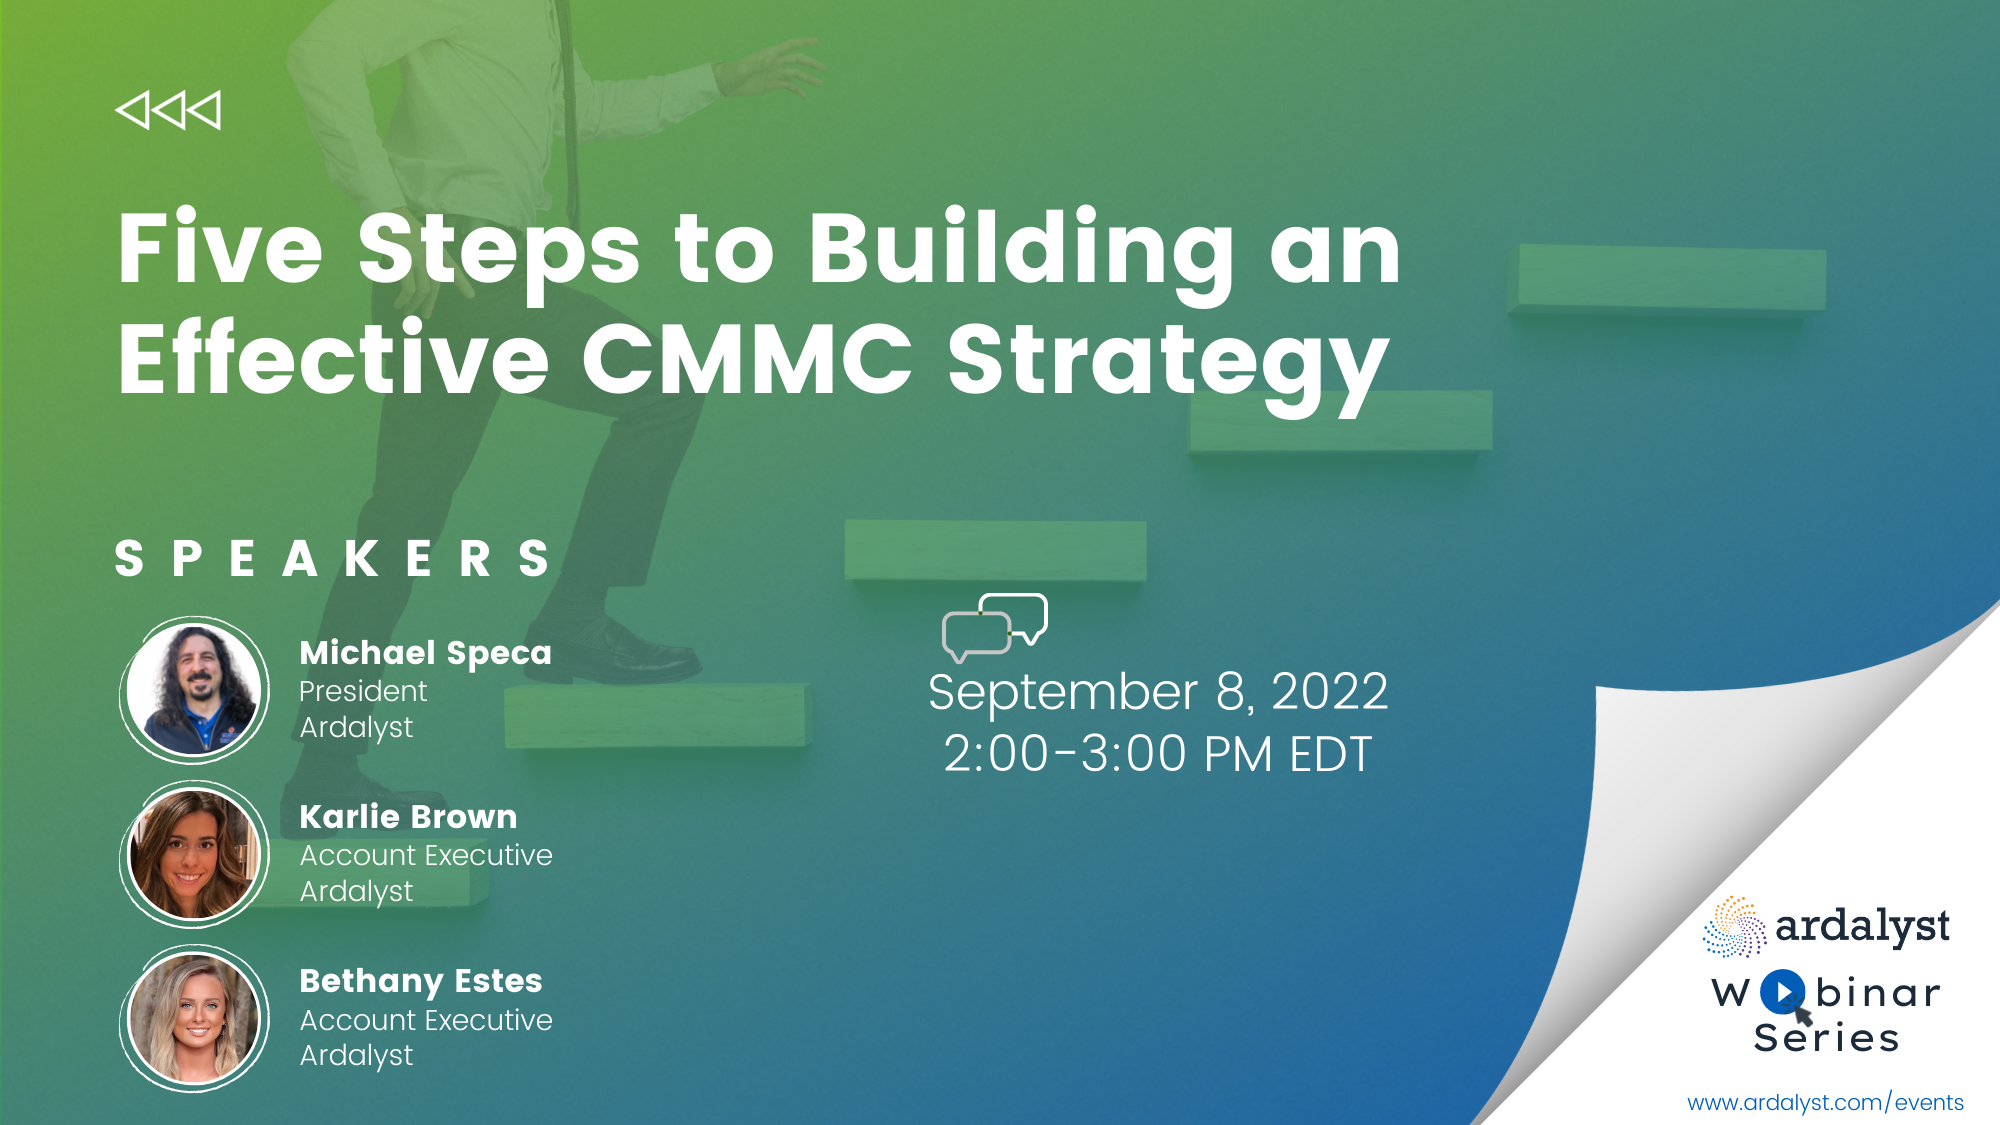 Five Steps to Building an Effective CMMC Strategy